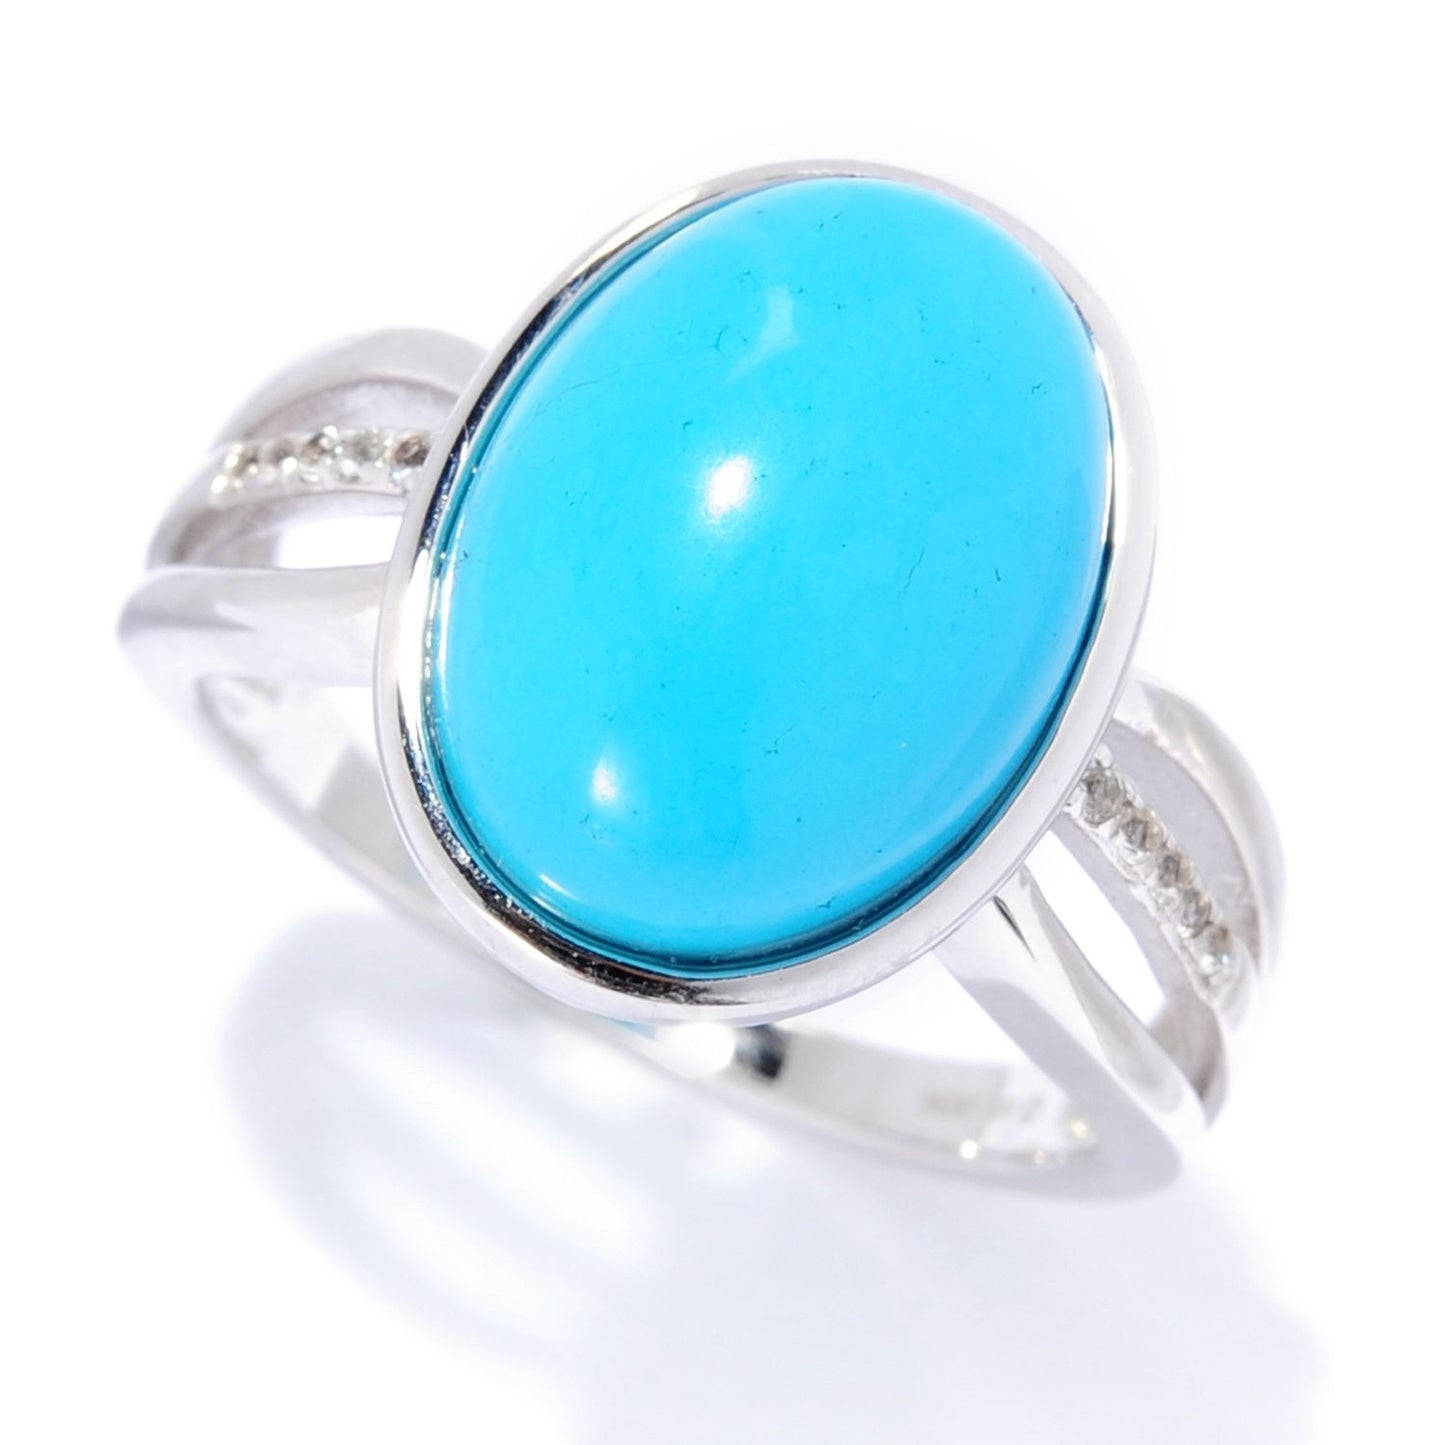 Pinctore Sterling Silver 14 x 10mm Sonora Beauty Turquoise & White Topaz Ring - pinctore